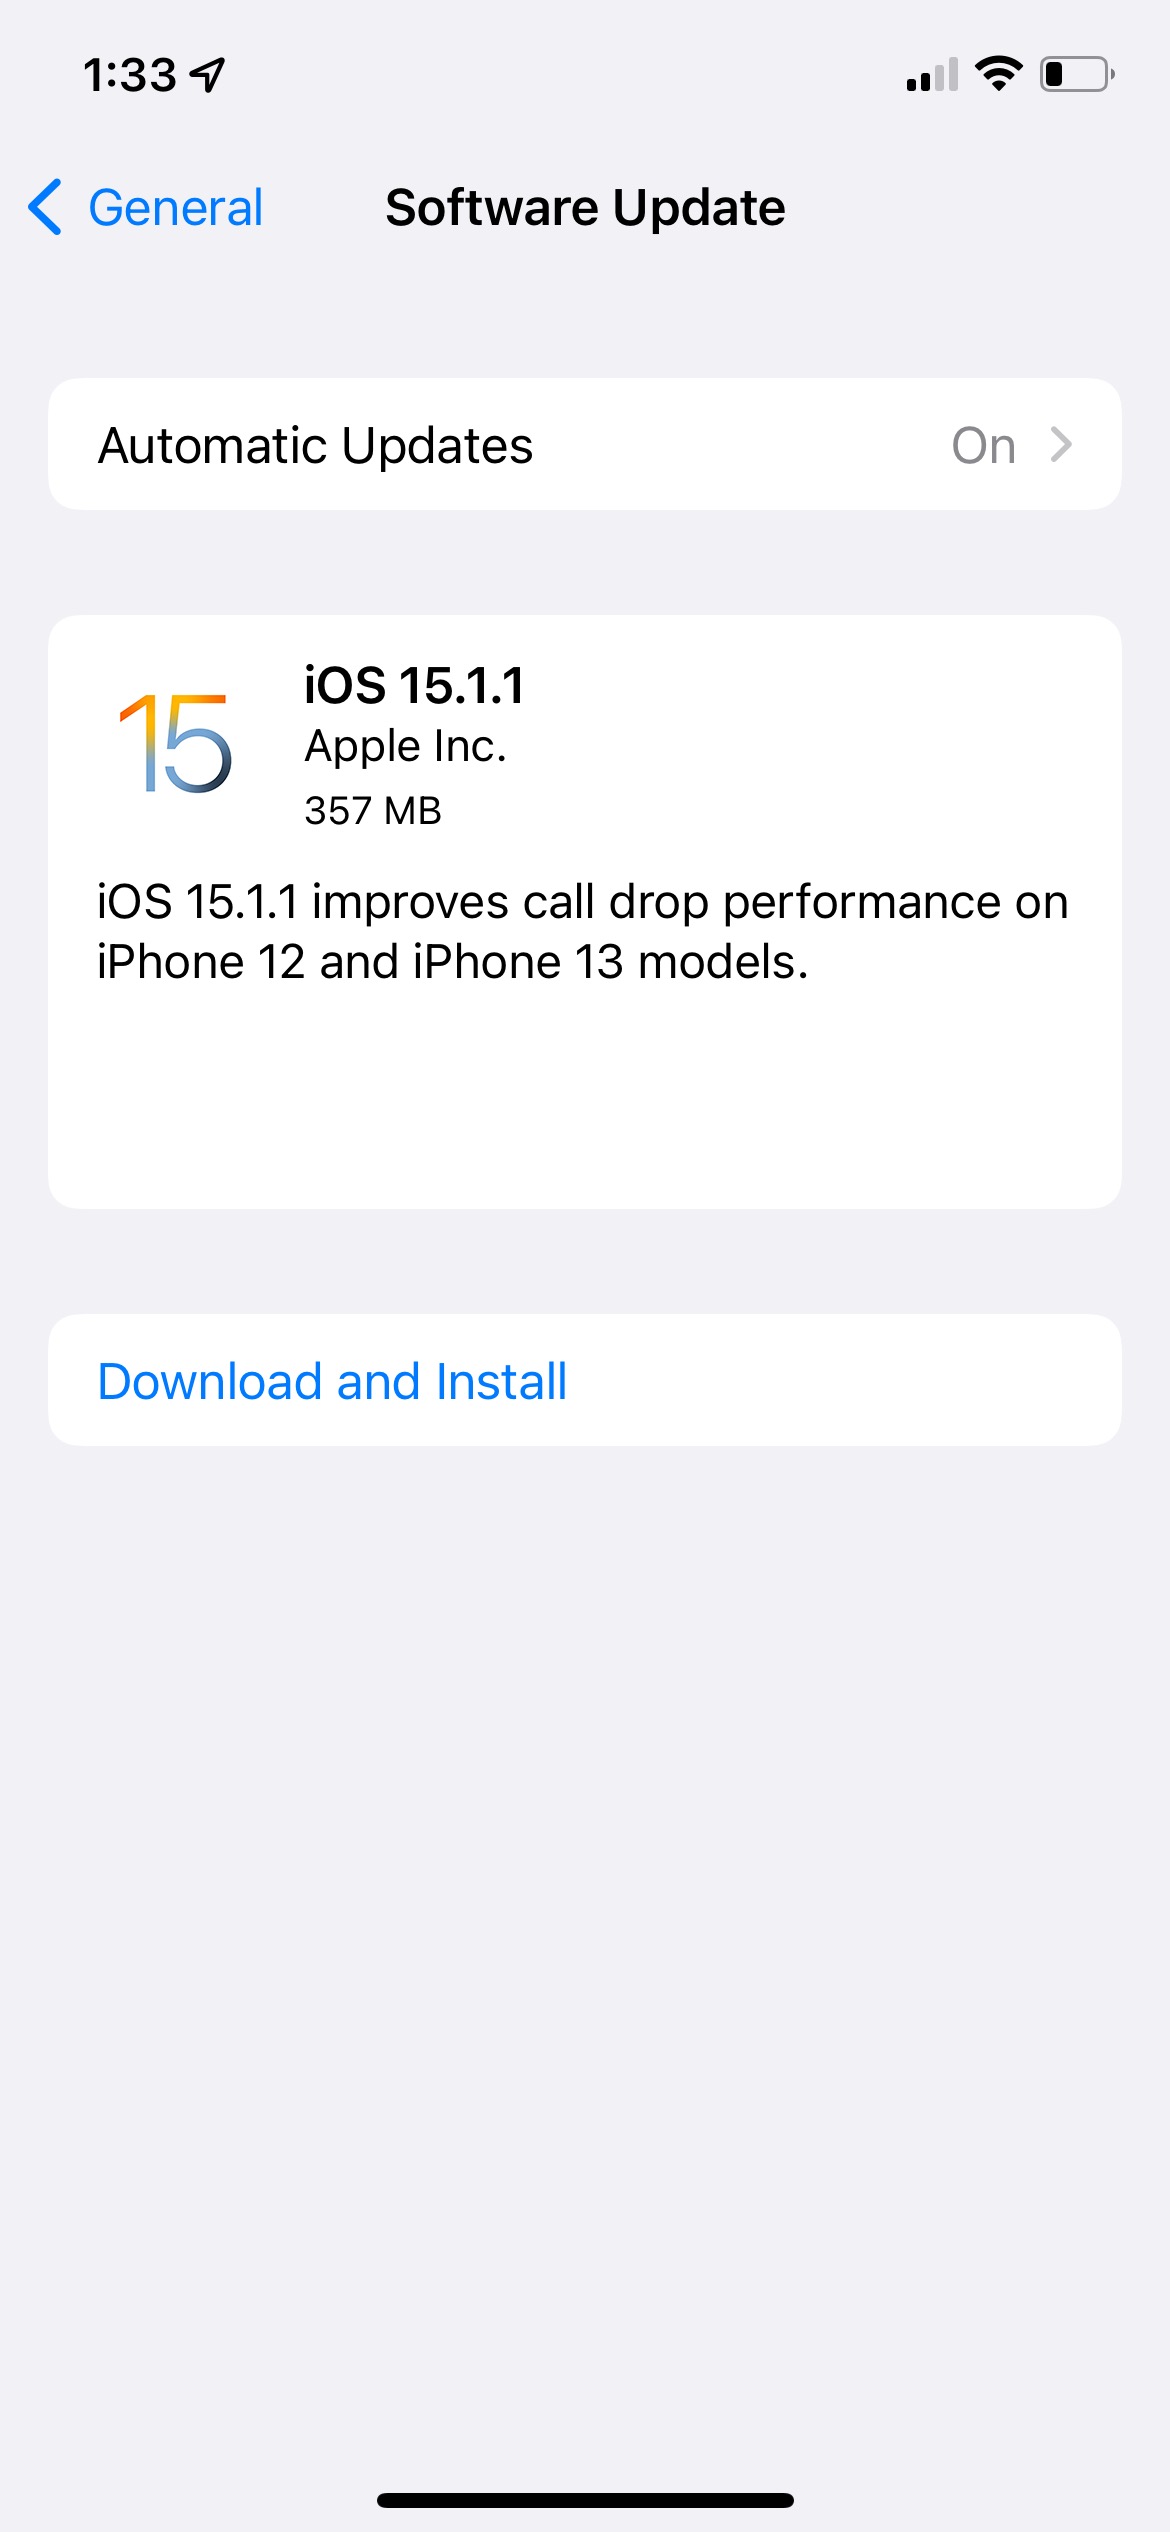 Apple Releases iOS 15.1.1 to Fix Call Drops on iPhone 12 and iPhone 13 [Download]